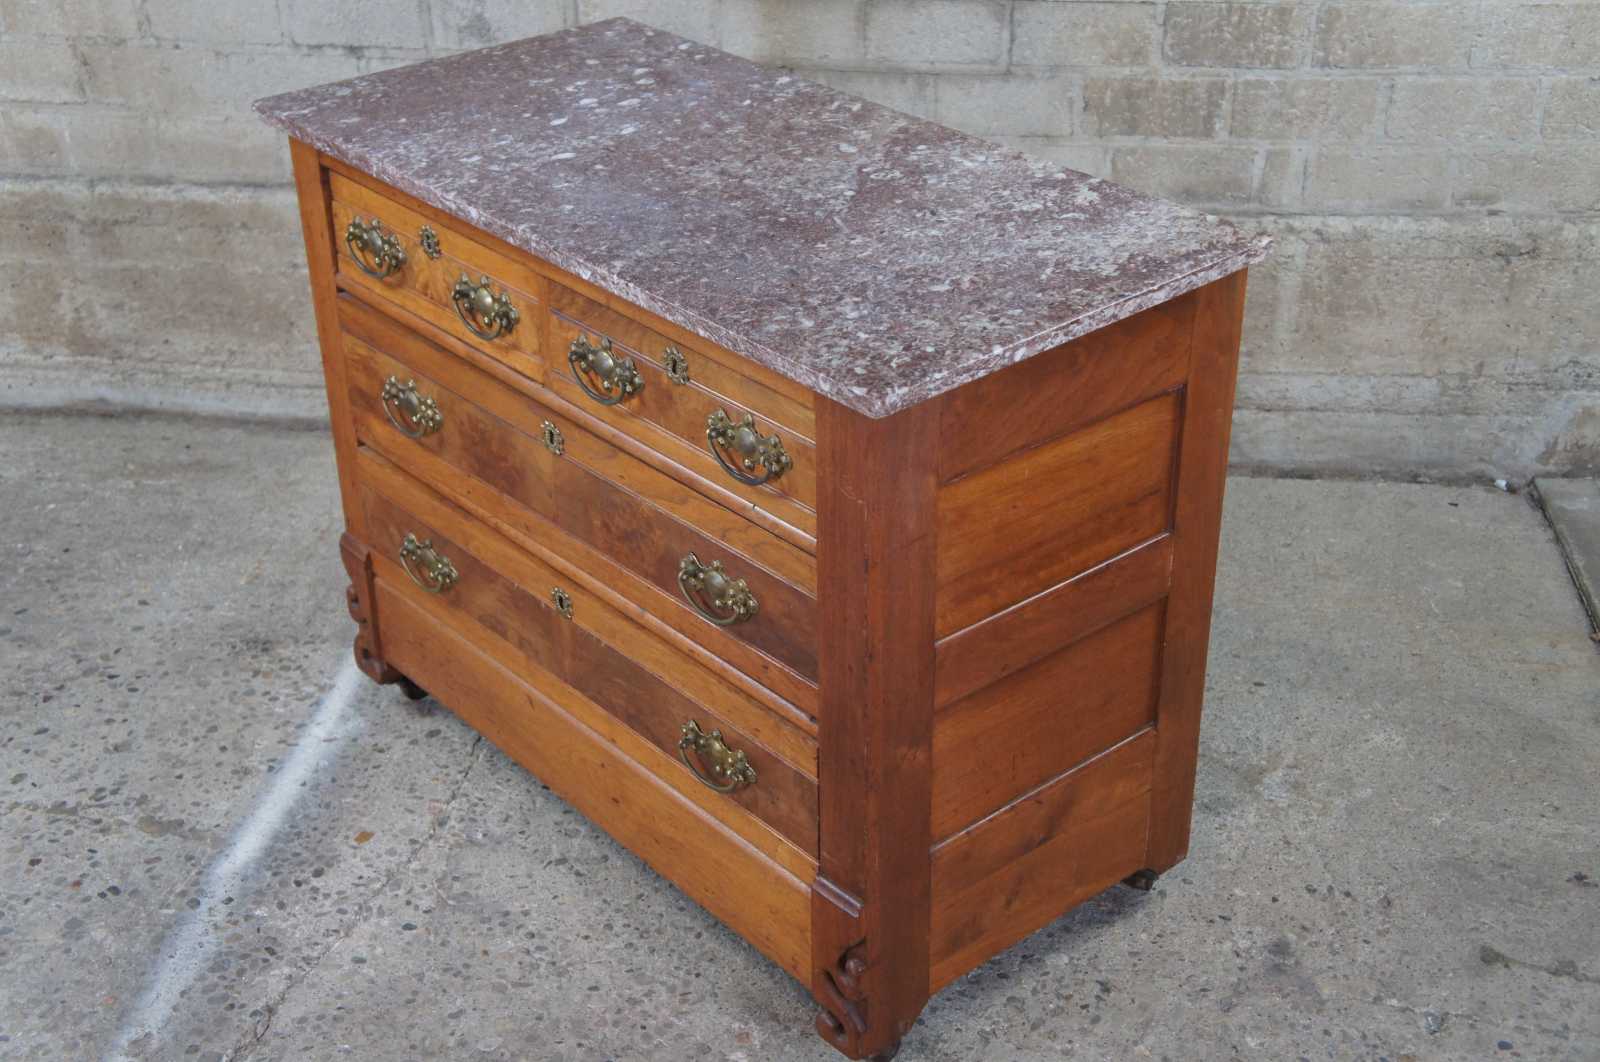 Wooden set of drawers purchased at antique mall near Kansas City, MO.  Drawers are set with steps at an angle. What was it originally for? :  r/whatisthisthing